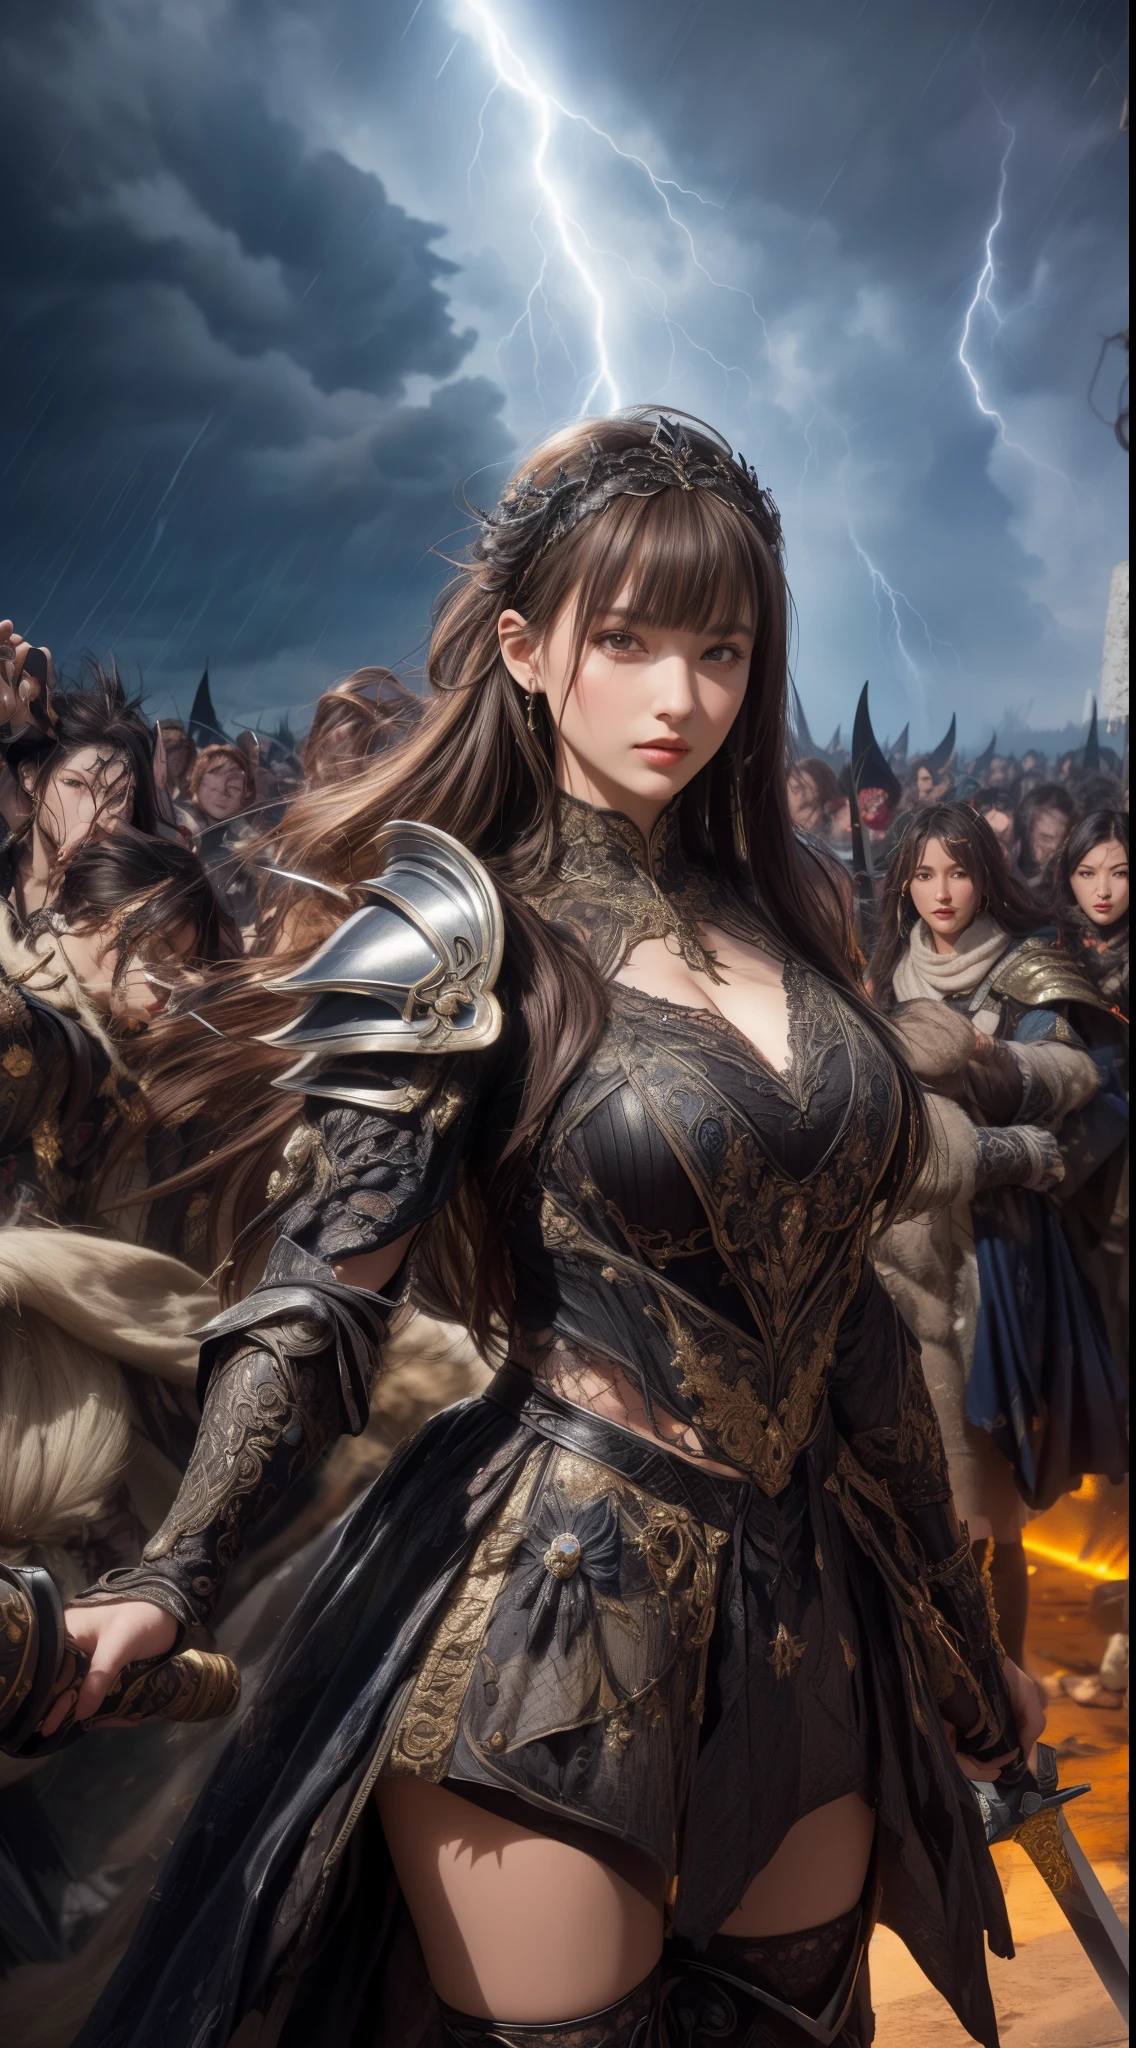 Cowboy Shot、Very beautiful woman、Slender women、(Detailed face)、Realistic Skin、((Demon Knight)), (Black Armor)、((((Black armor with very fine and intricate decoration))))、((Delicate photo))，(Girl Astepeace RAW Photo Details:1.25), (highest quality:1.6), (超A high resolution:1.5), (Realistic:1.75), 8K resolution, Canon EOS R5, 50mm, Absurd, Ultra-detailed,Cinema Lighting,Battlefields of Medieval Europe、((battle))、RPG World、Final Fantasy、(((Embellished skirt)))、Thigh-high socks、Shin Guards、night、((Long hair with bangs,))、Get six-pack、Torn Cloak、Beautiful Armor、(((Giant Sword)))、In combat、The wind is blowing、((Asymmetrical Armor:1.5))、(((thunderstorm)))、((Knight Commander))、(((Leading a large group of black knights)))、Banner、Wolf Pattern:1.5